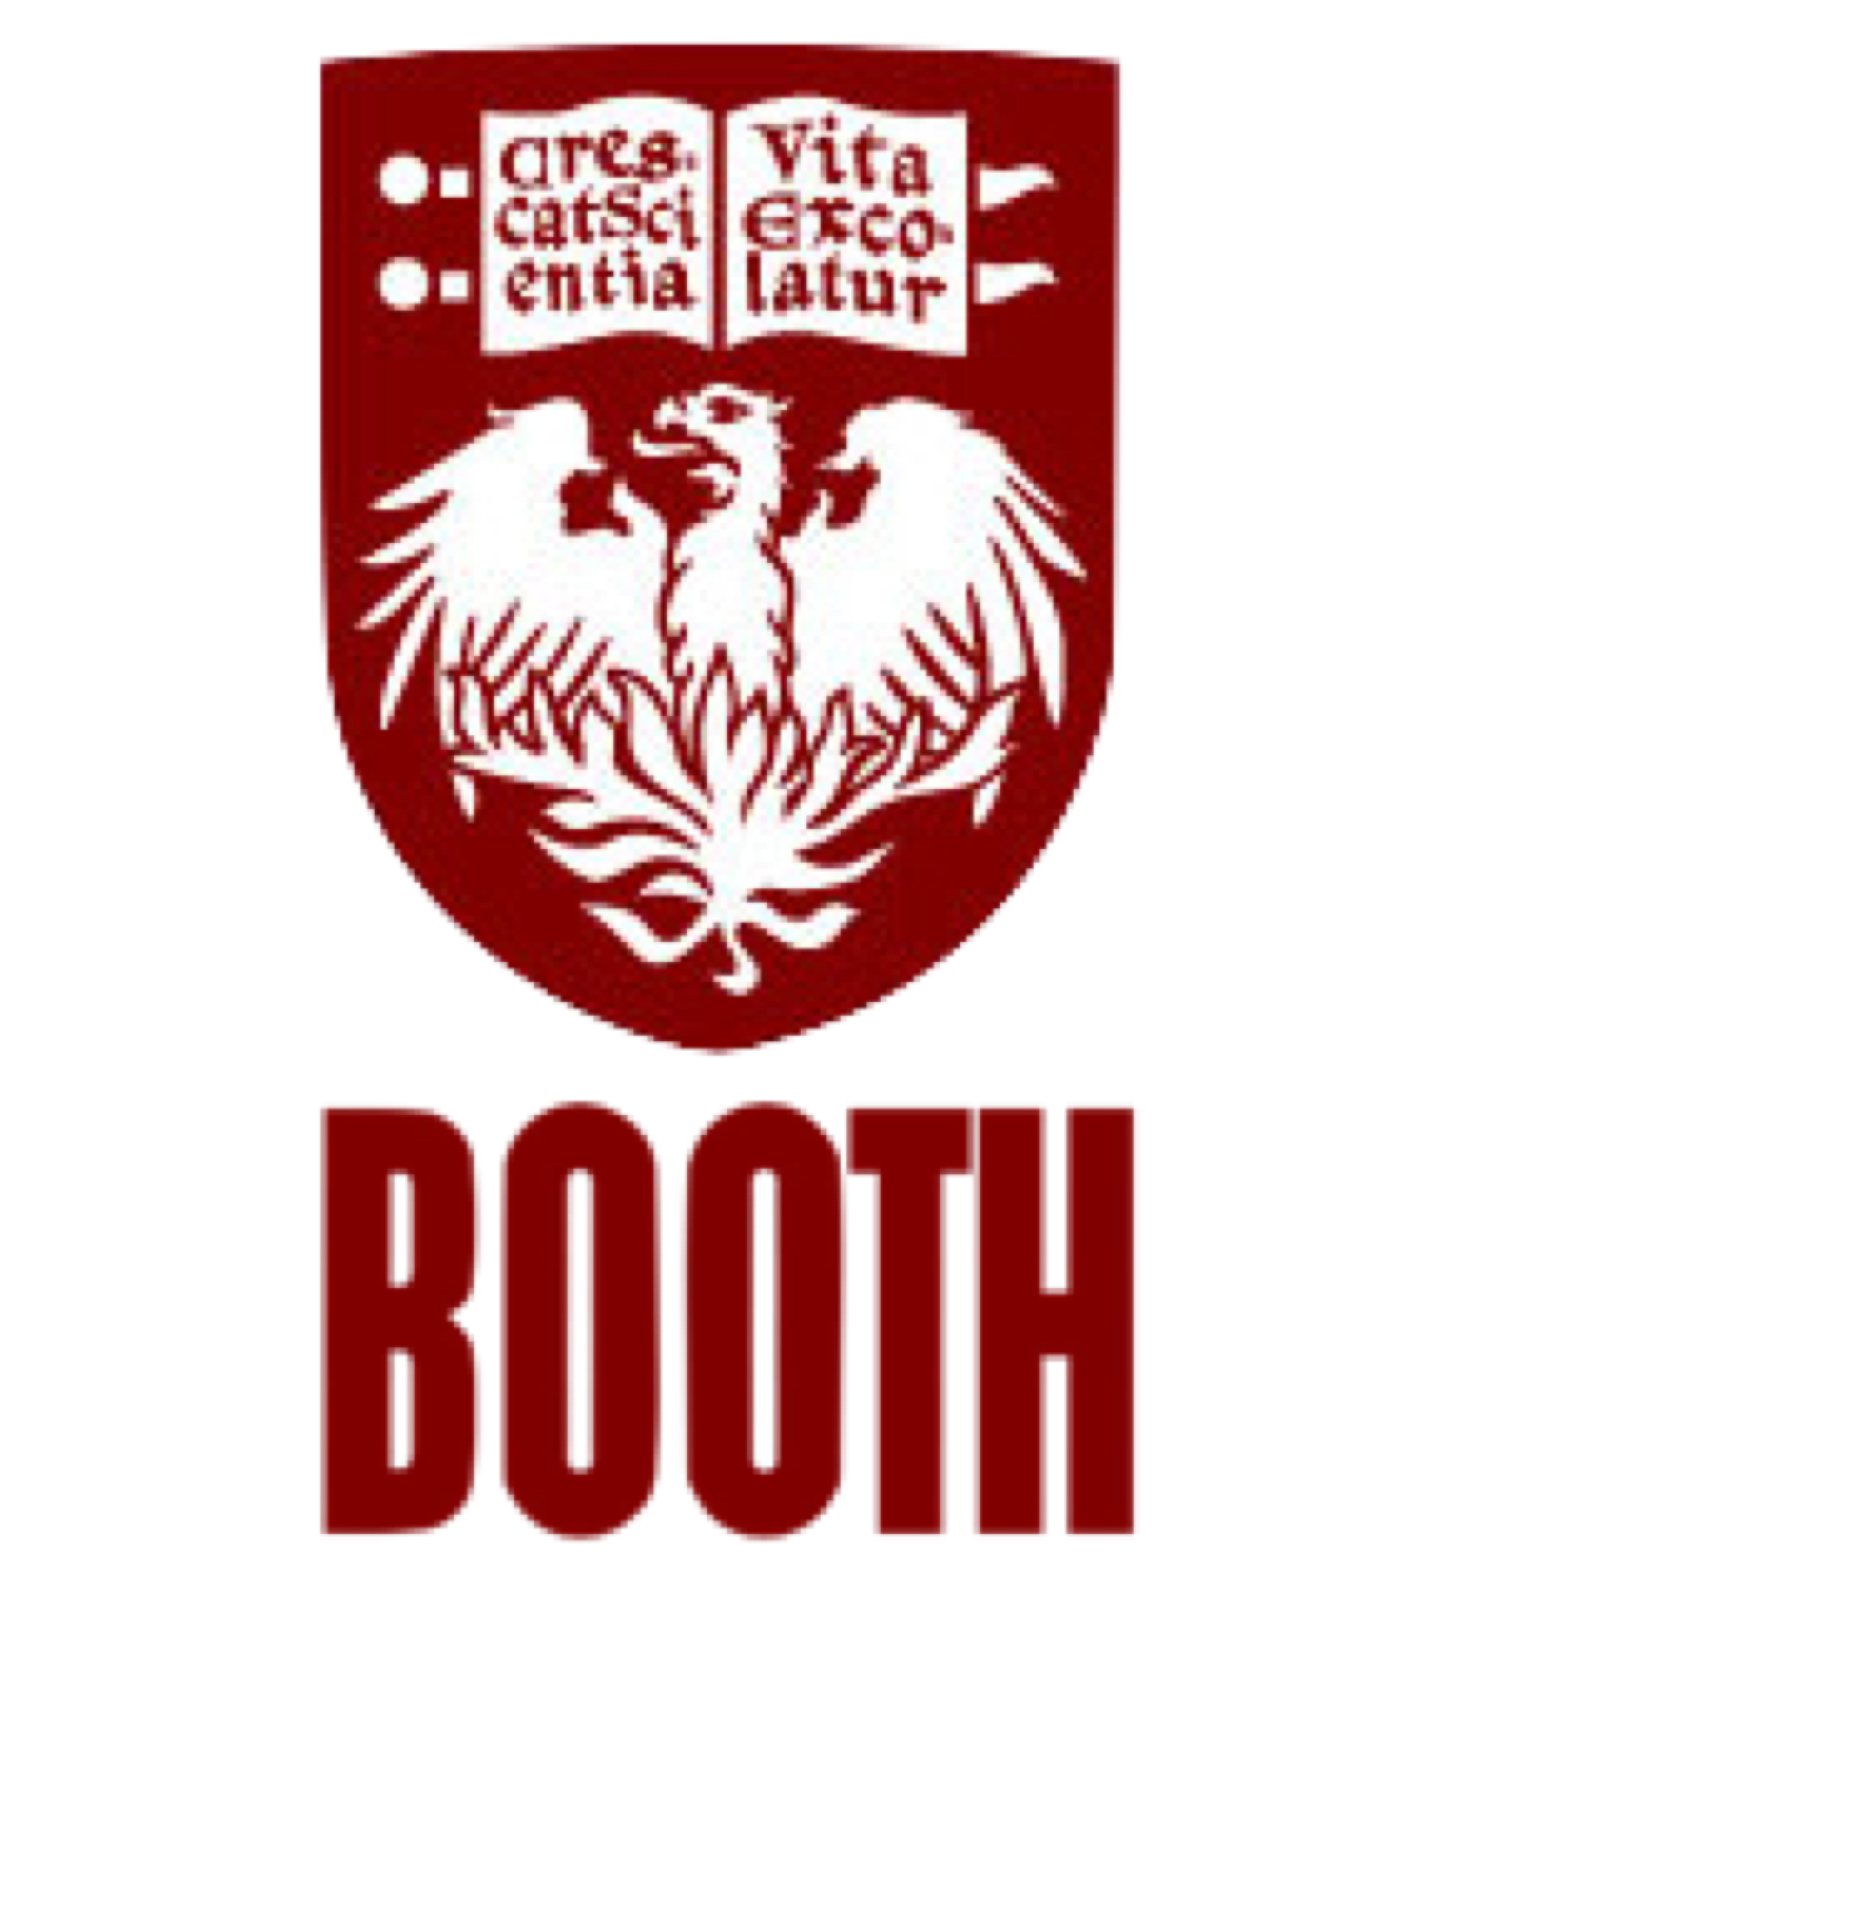 The University of Chicago Booth School of Business 